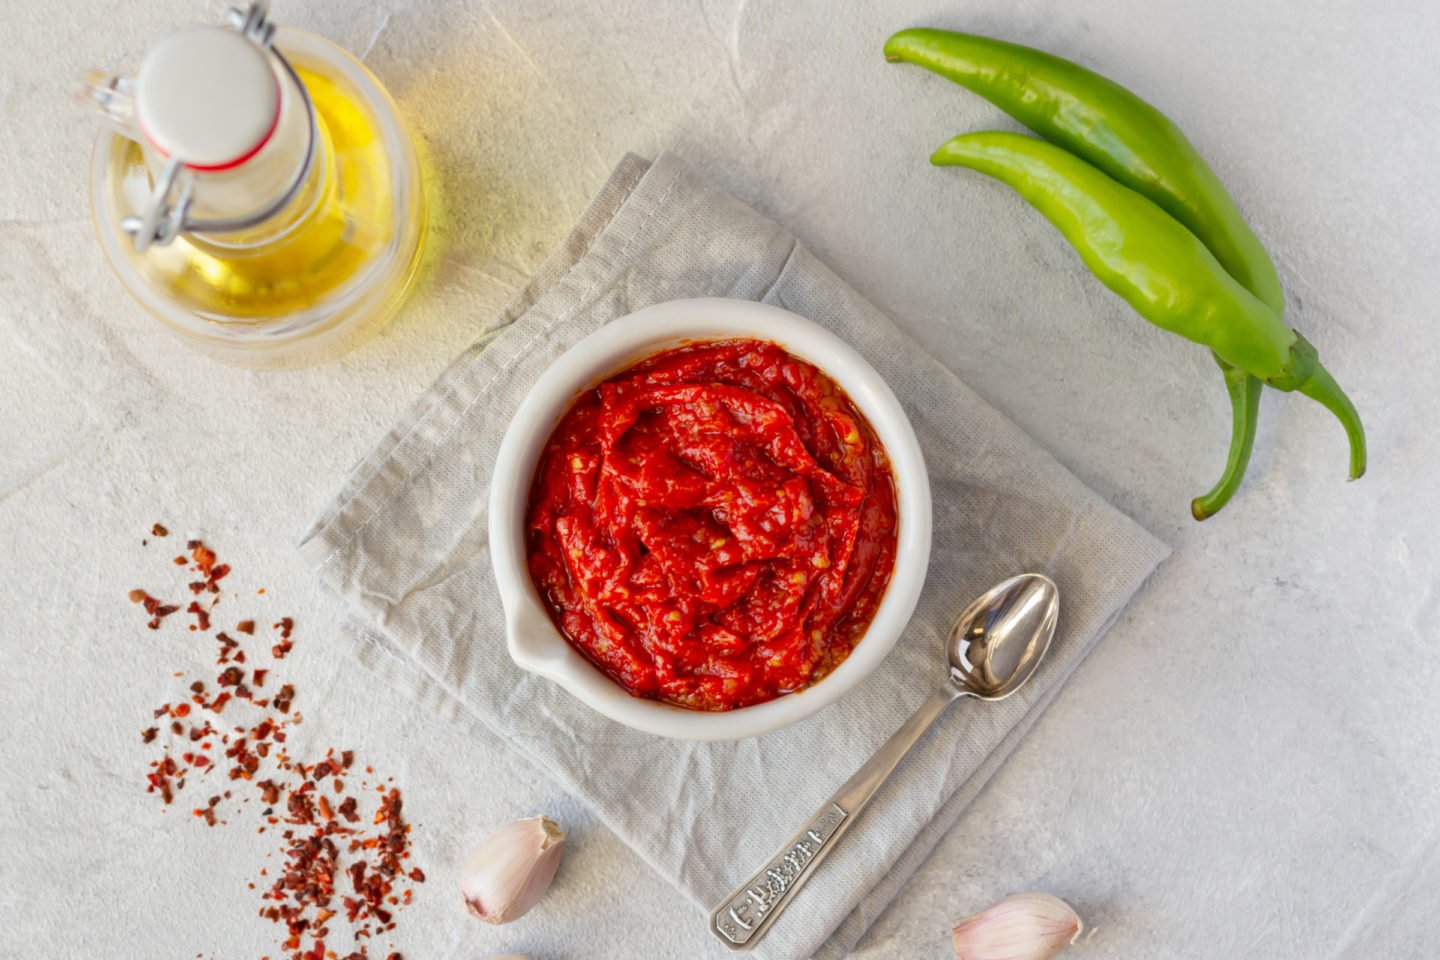 Green Chilis With Tomato Sauce Or Paste